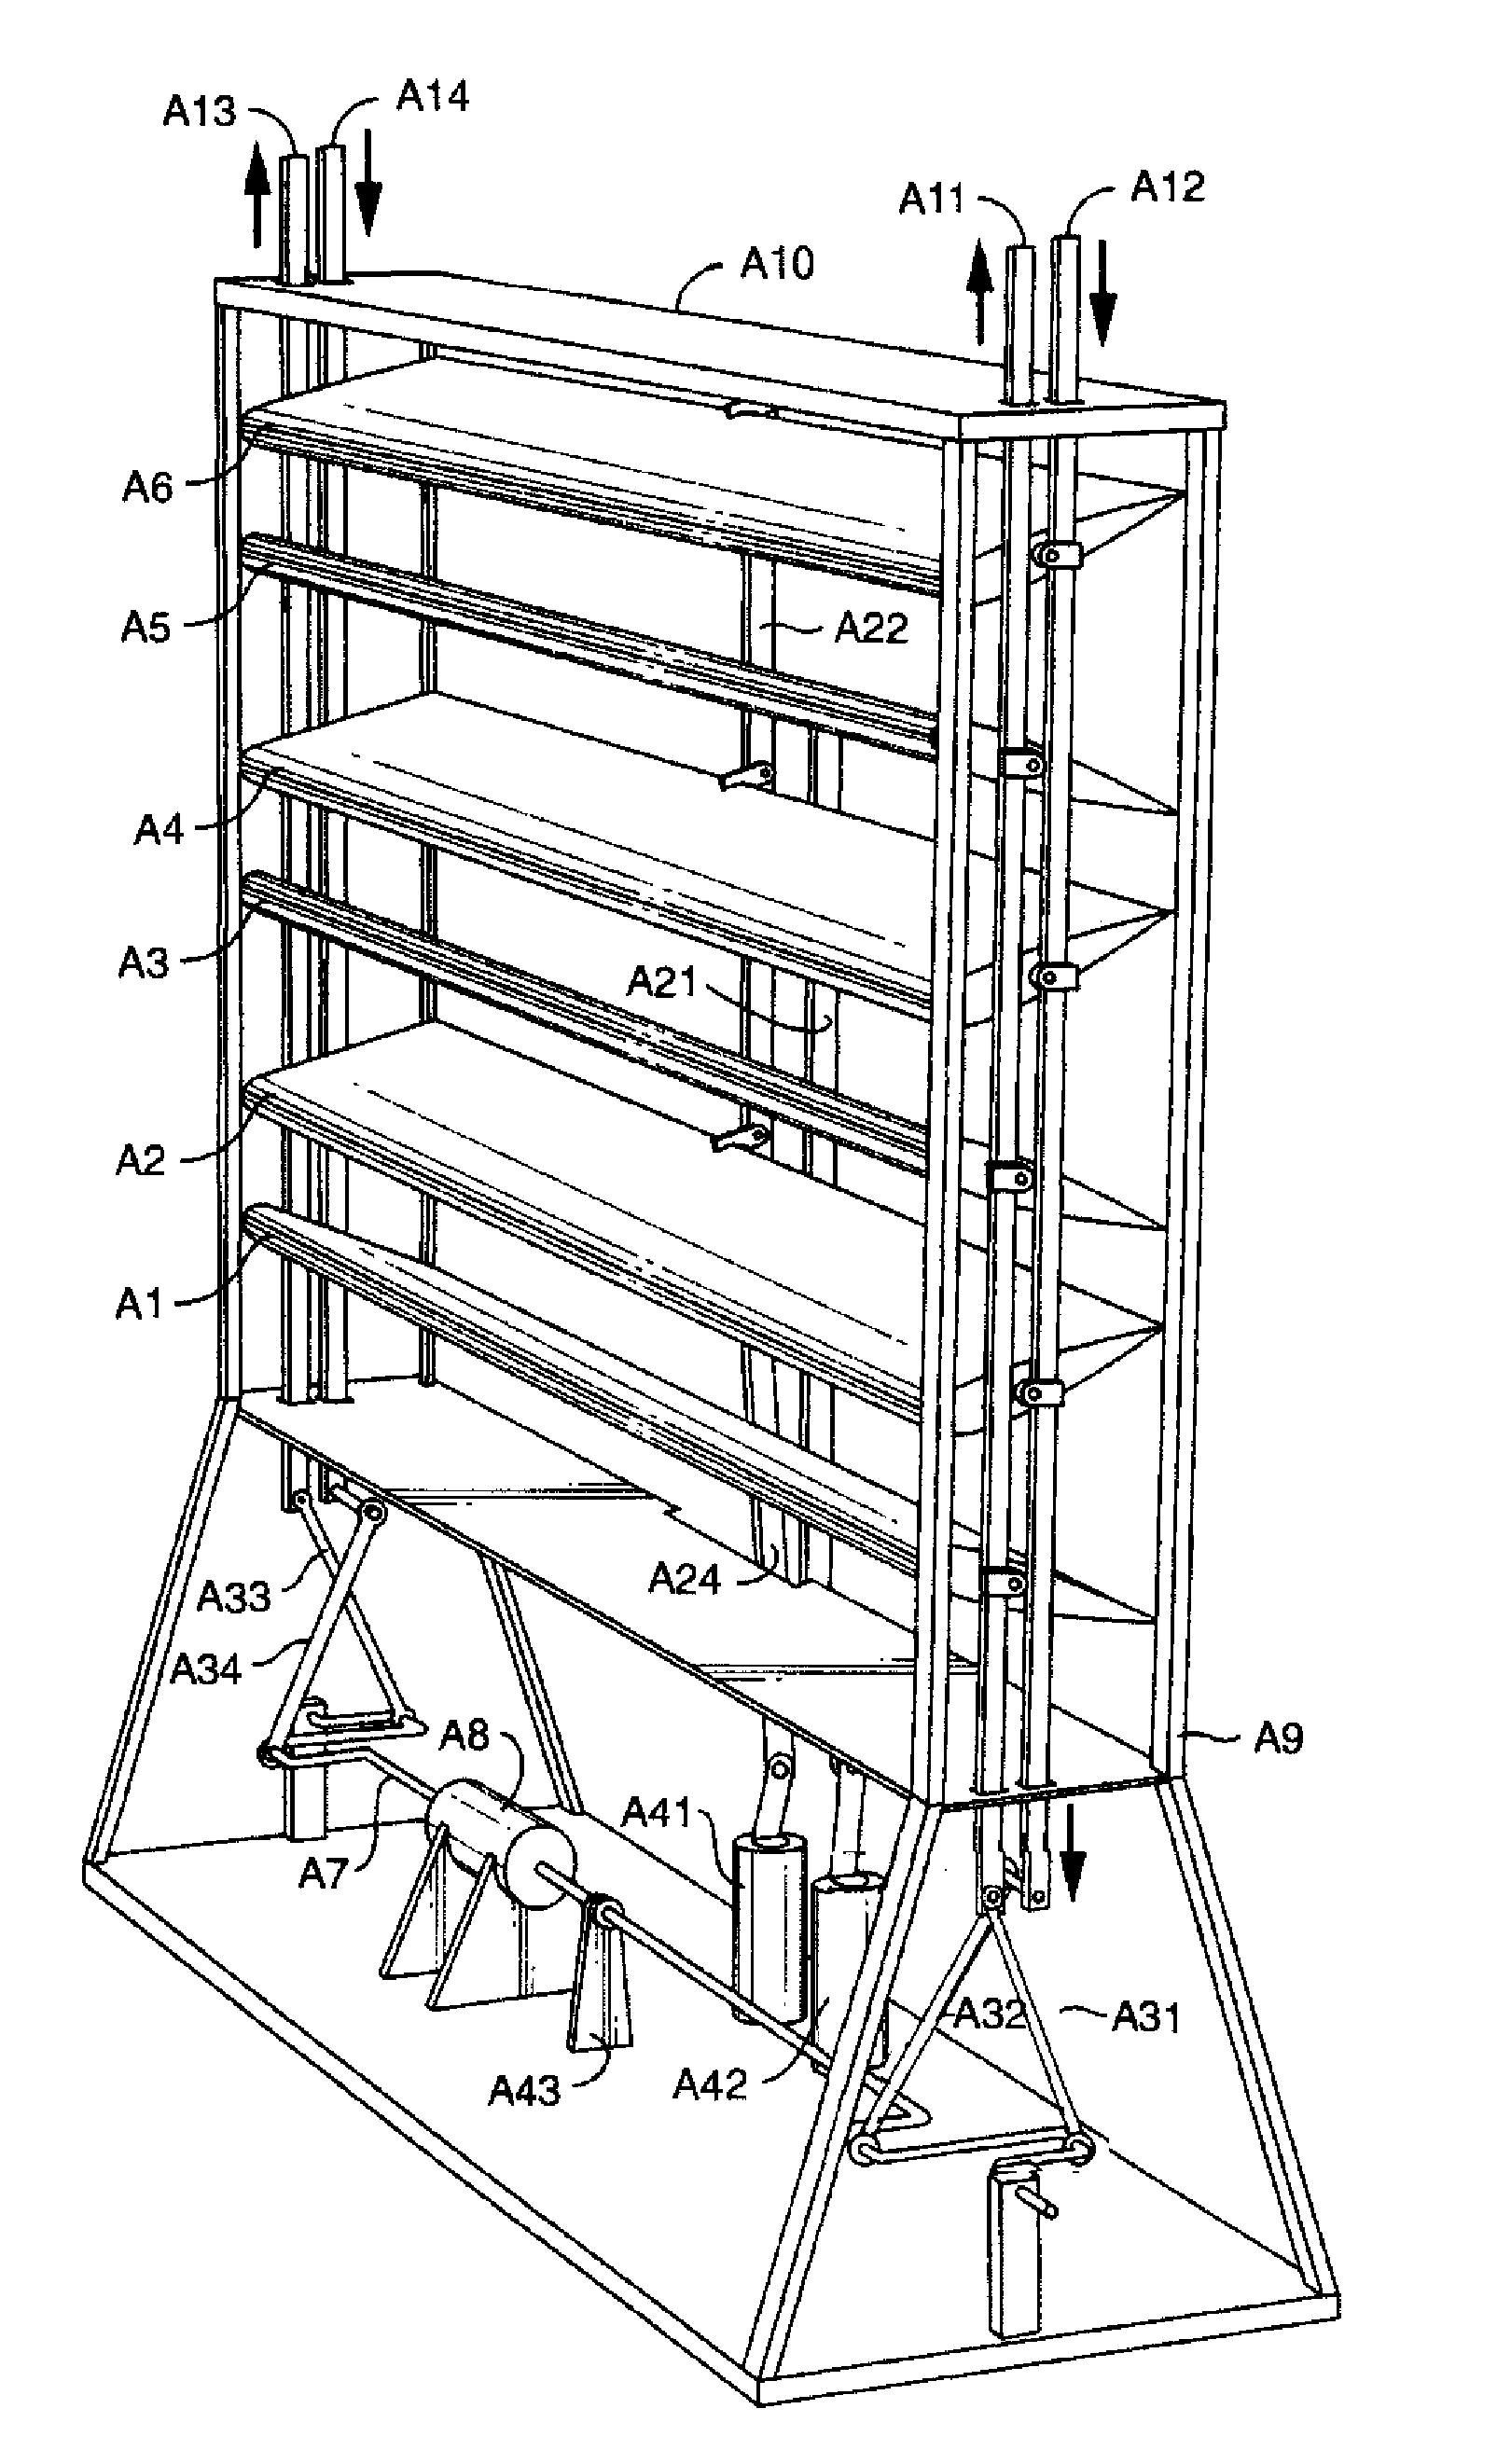 Reciprocating Wind-powered Transducer Employing Interleaved Airfoil Arrays